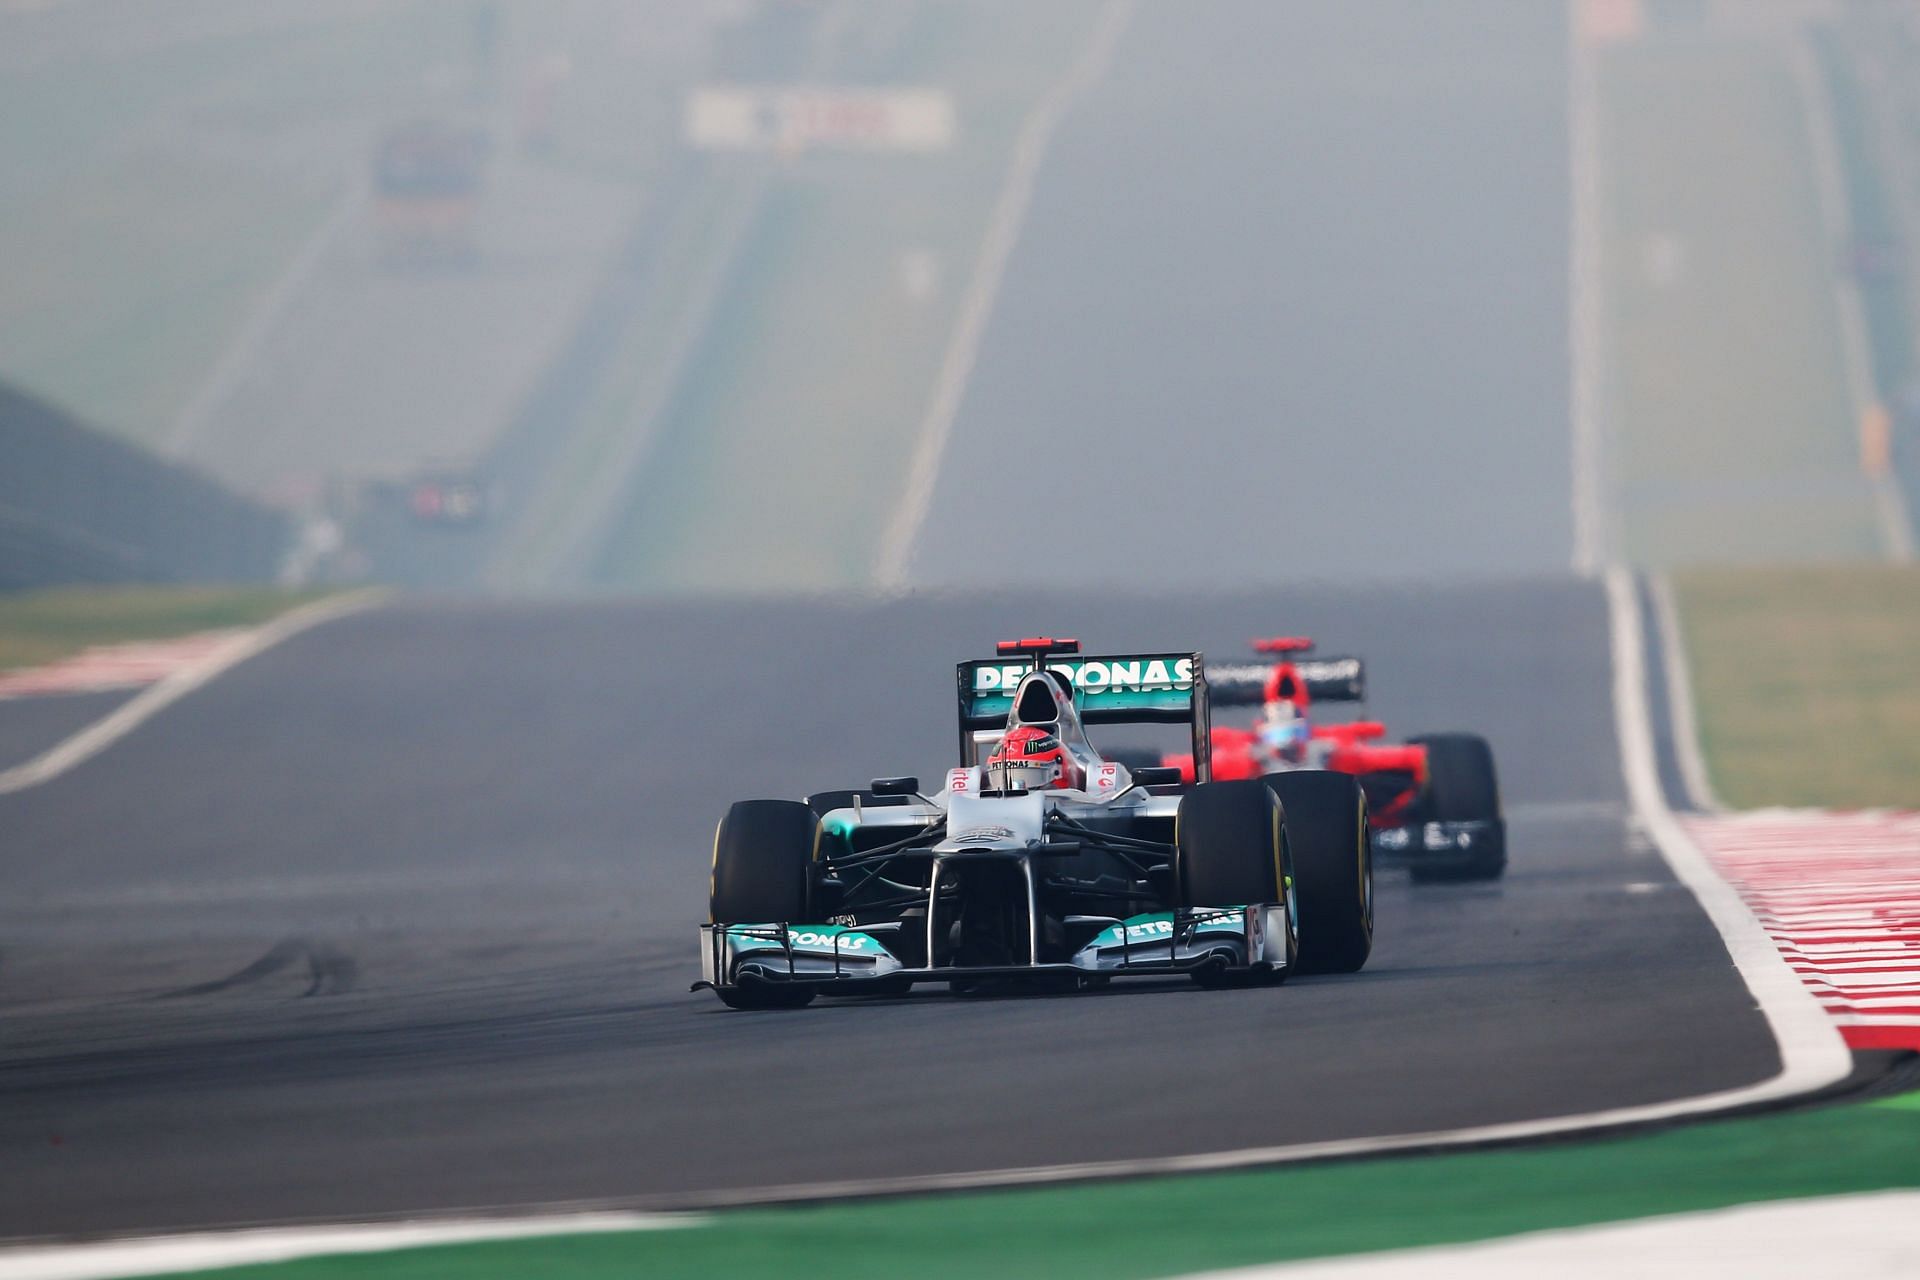 Michael Schumacher racing during the F1 Indian GP(Photo by Clive Mason/Getty Images)